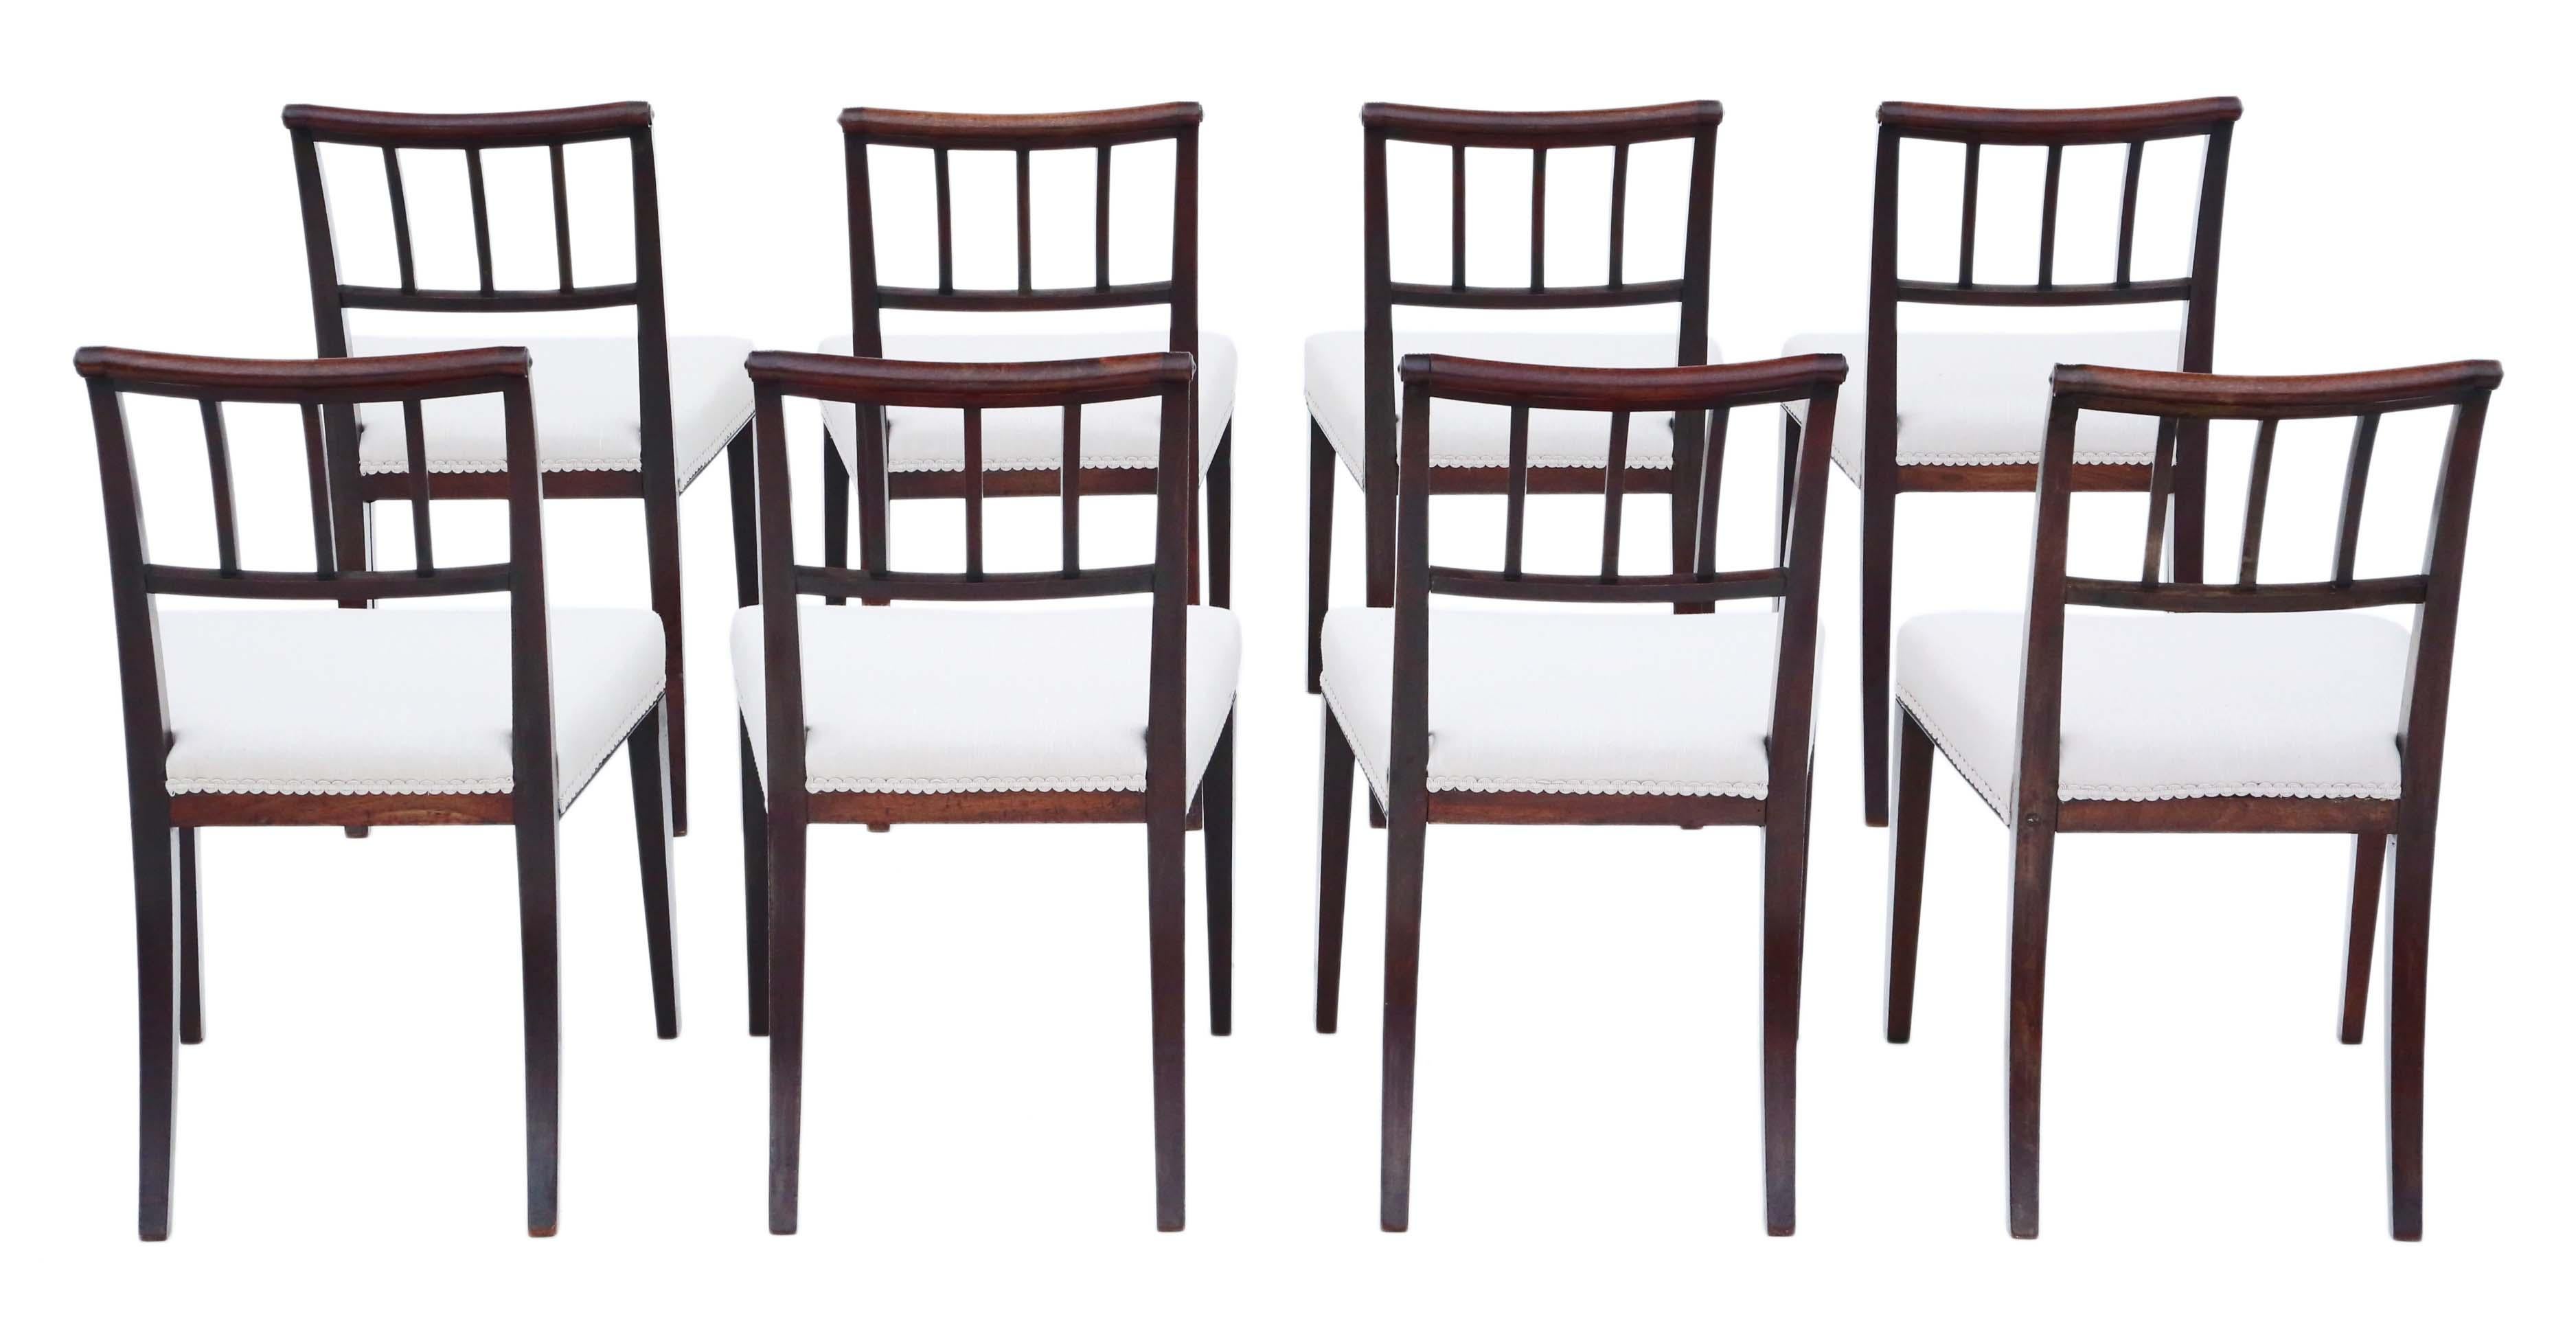 Antique fine quality set of 8 Georgian mahogany dining chairs C1810. Very rare, with an elegant design!

No loose joints.

New professional upholstery.

Overall maximum dimensions: 51cm W x 50cm D x 84cm H (44cm H seat when sat on)

Good